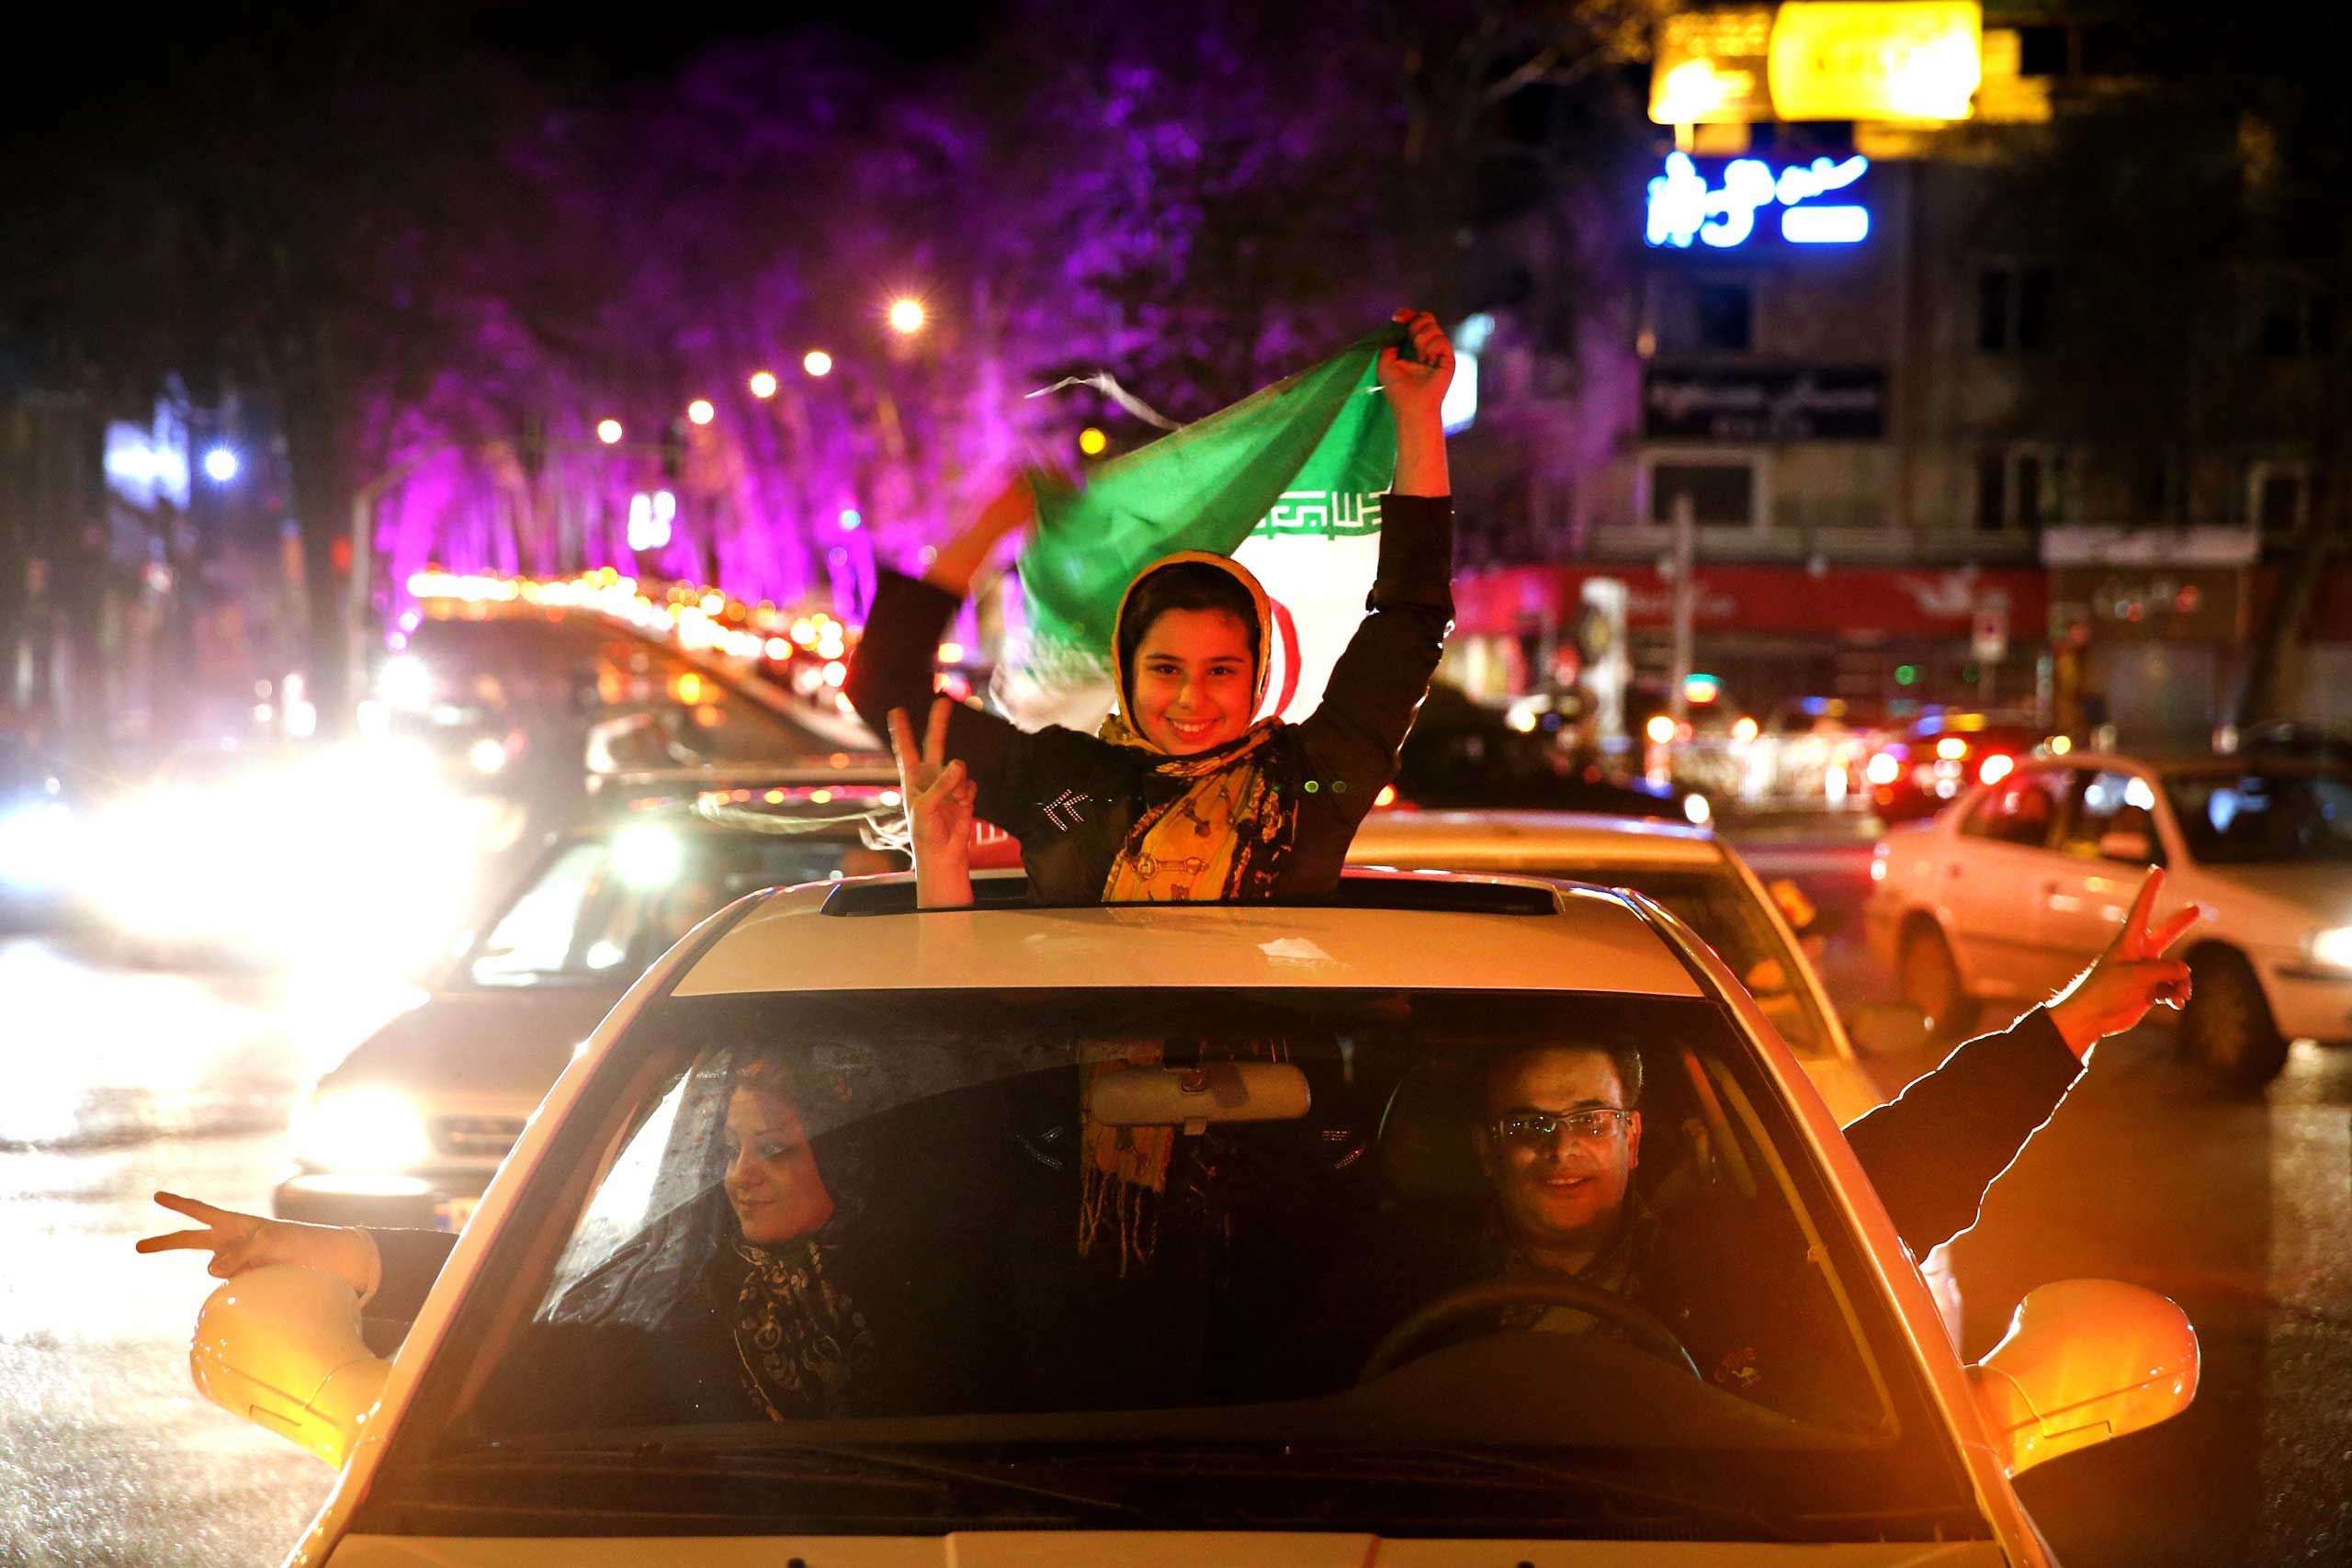 Iranians celebrate Iran's nuclear agreement with world powers on a street in northern Tehran, Iran, on Apr. 2, 2015. (Ebrahim Noroozi—AP)